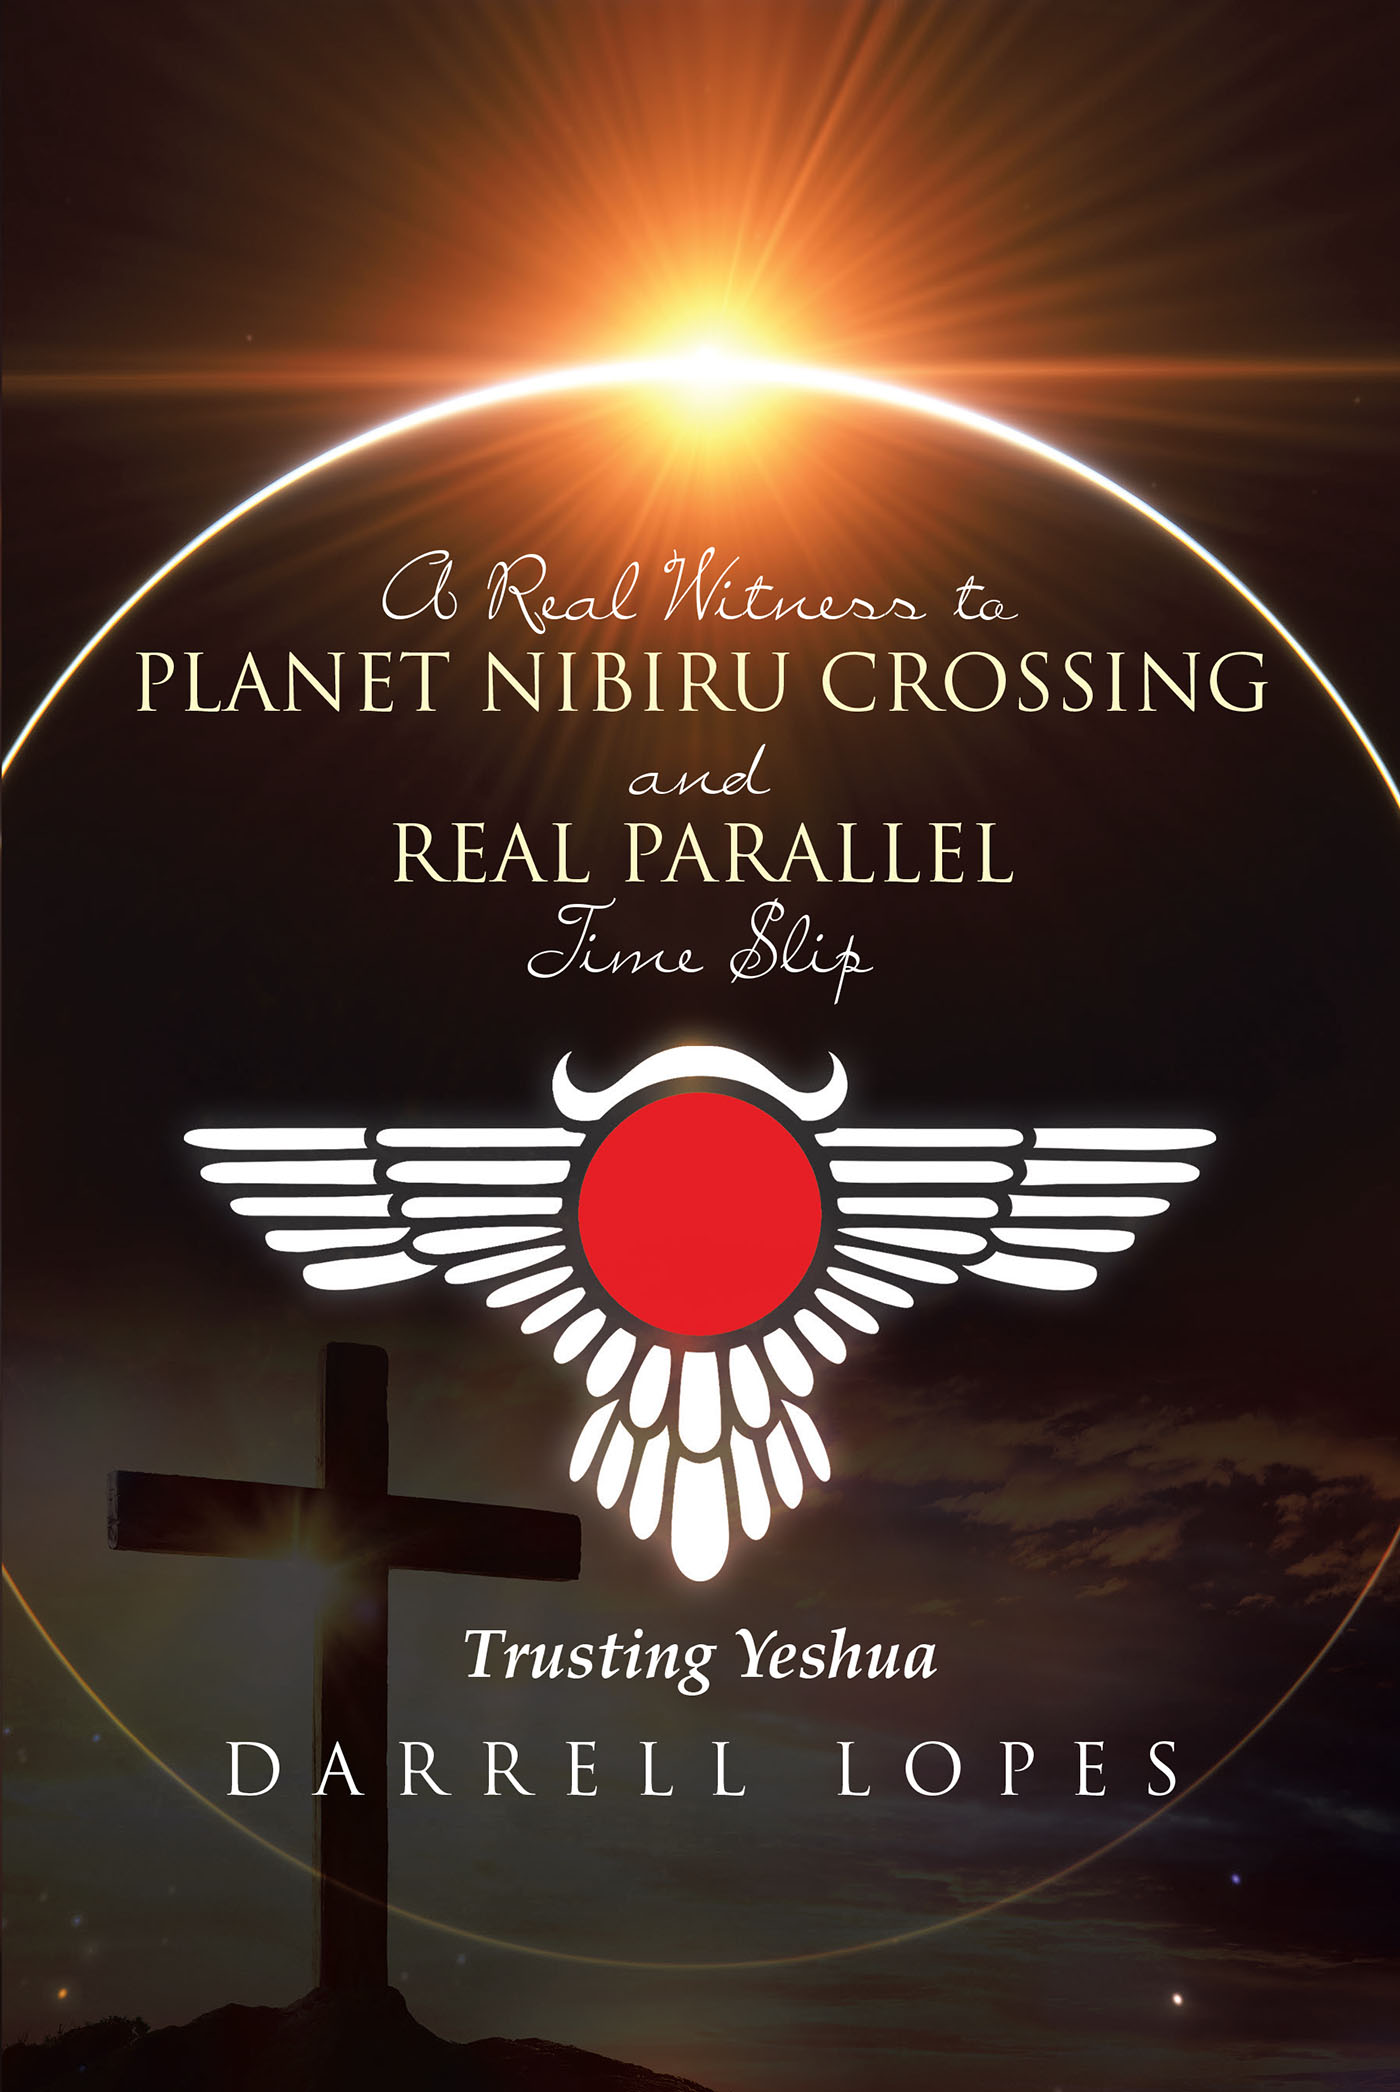 Author Darrell Lopes’s New Book, "A Real Witness to Planet Nibiru Crossing and Real Parallel Time Slip," Explores the Author’s Unwavering Faith Despite Odd Occurrences